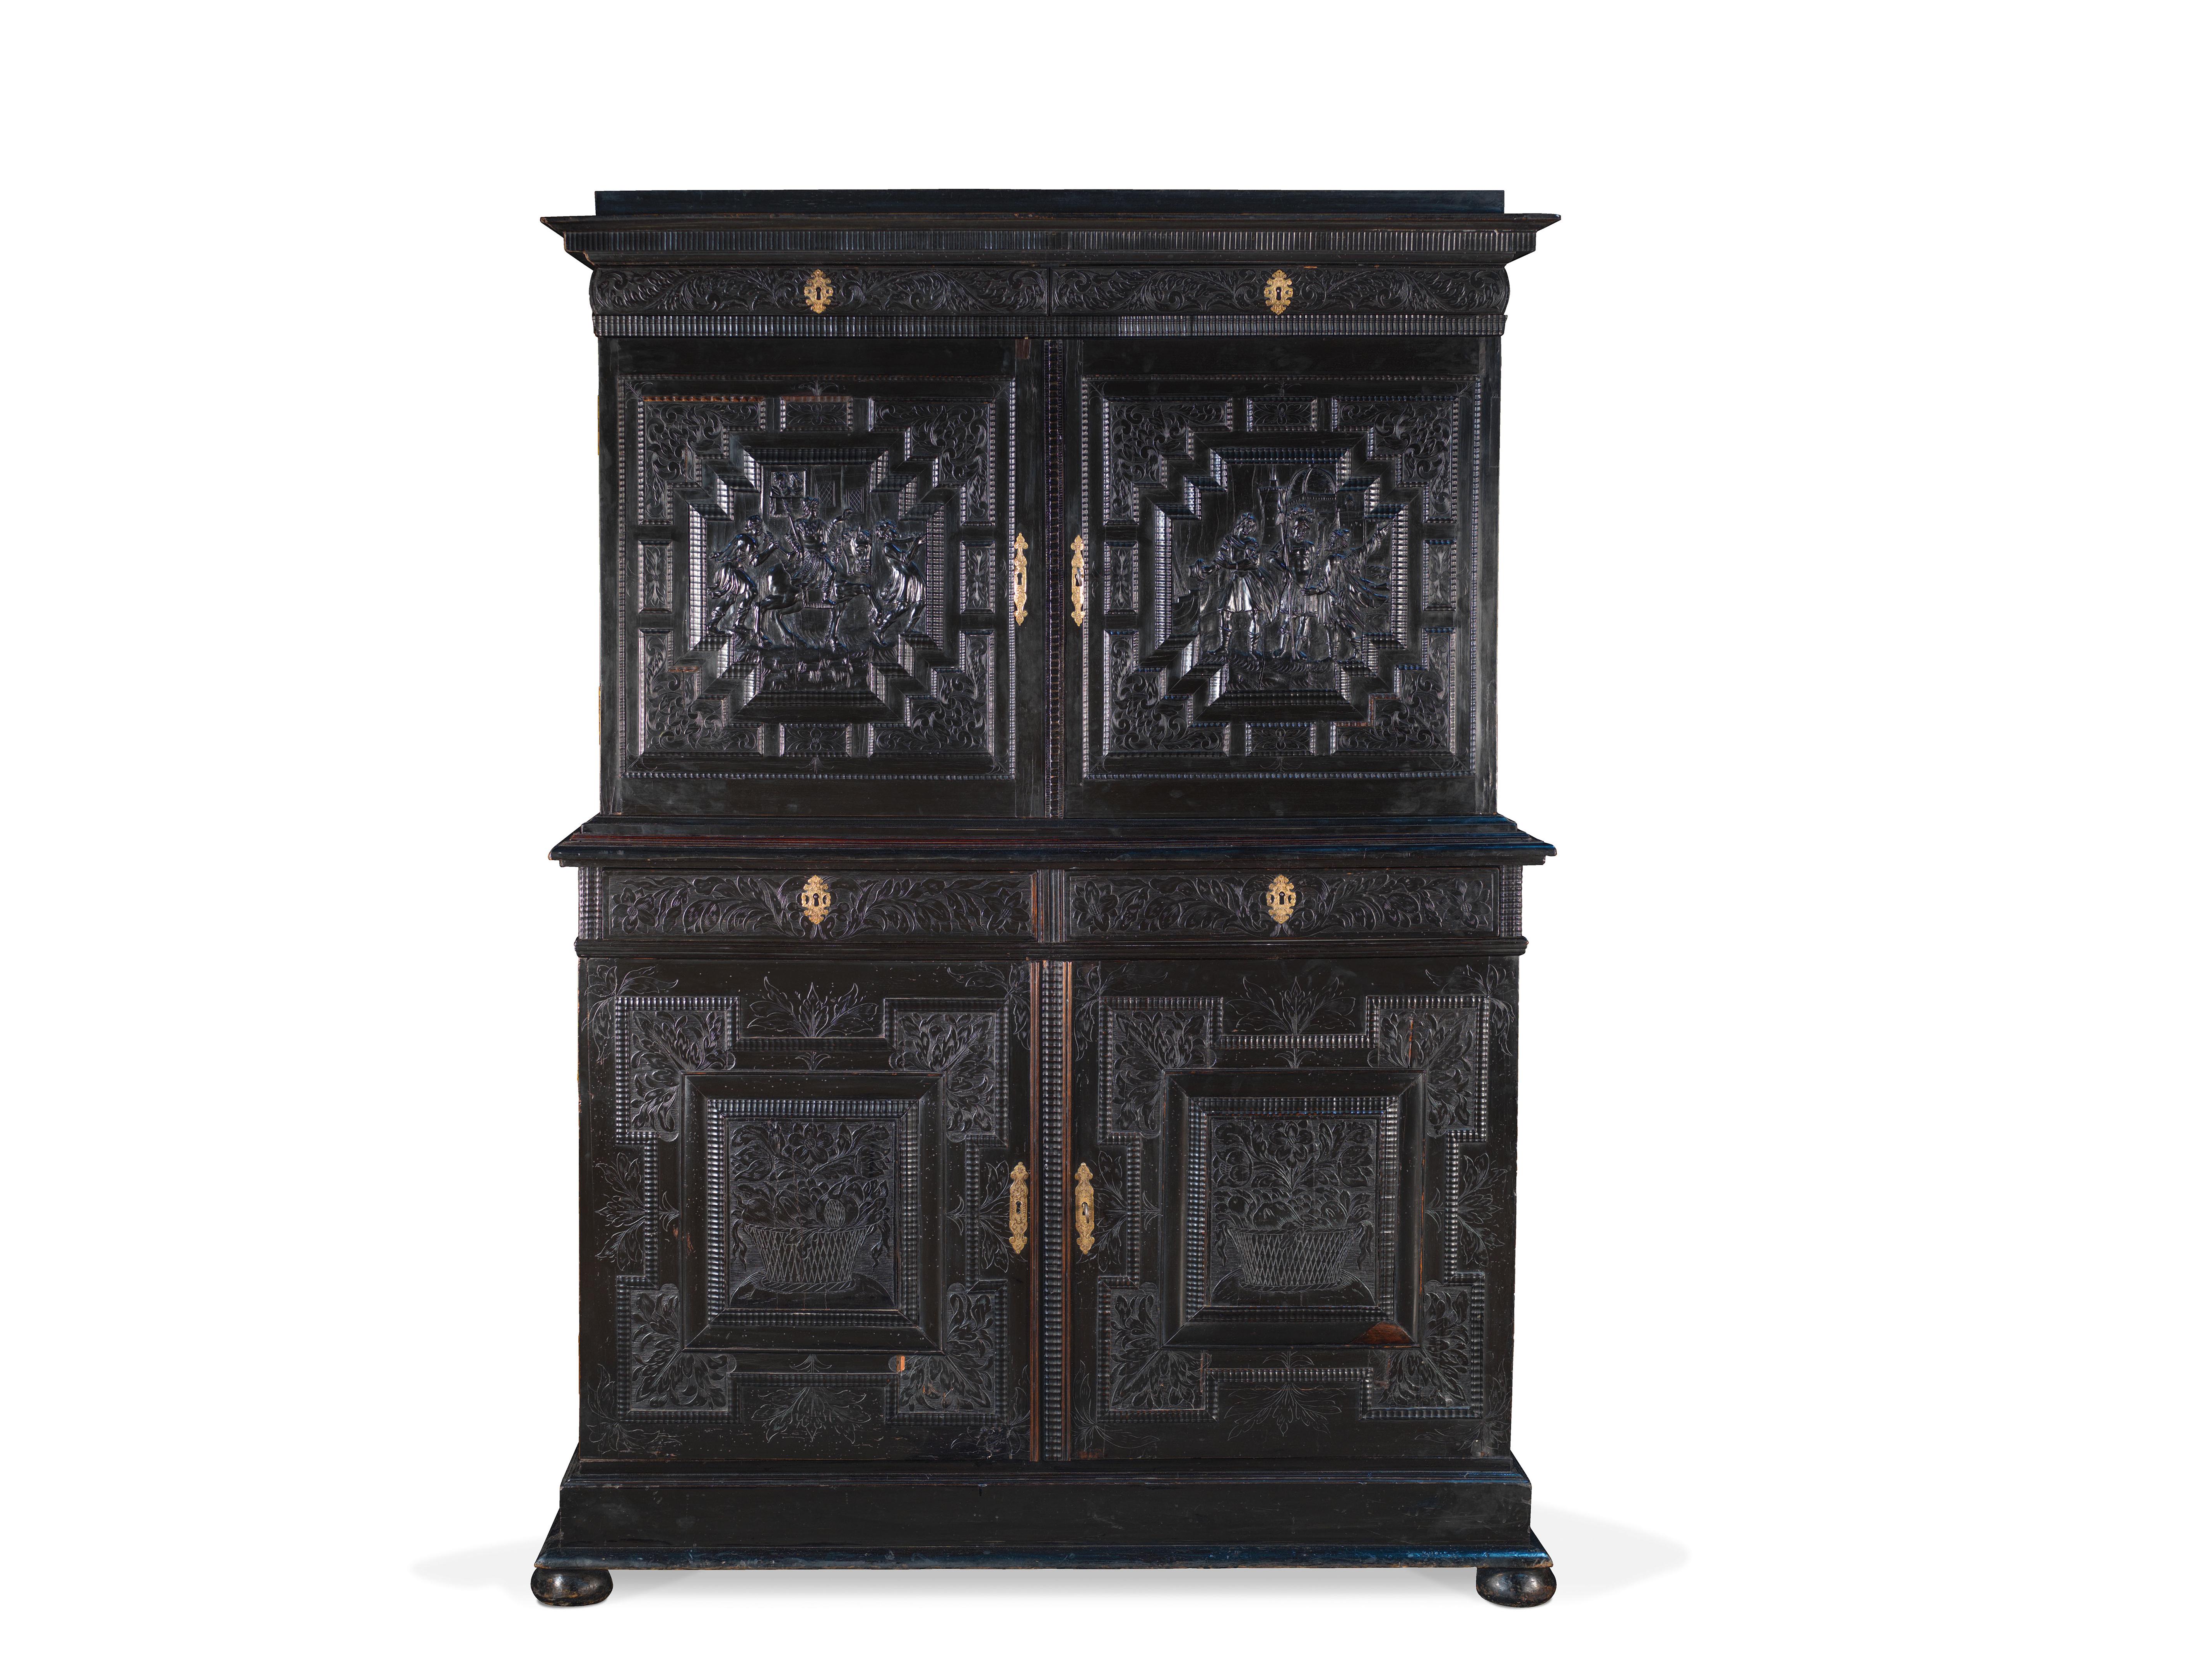 IMPORTANT CABINET WITH TWO BODY IN BLACKENED WOOD CARVED AND ENGRAVED 

ORIGIN: FRANCE
PERIOD: 17TH CENTURY

Height: 188 cm
Width: 135 cm
Depth: 53.5 cm	

Blackened wood and veneer: rosewood, ebony, pear, mahogany
Framed in oak wood

A real